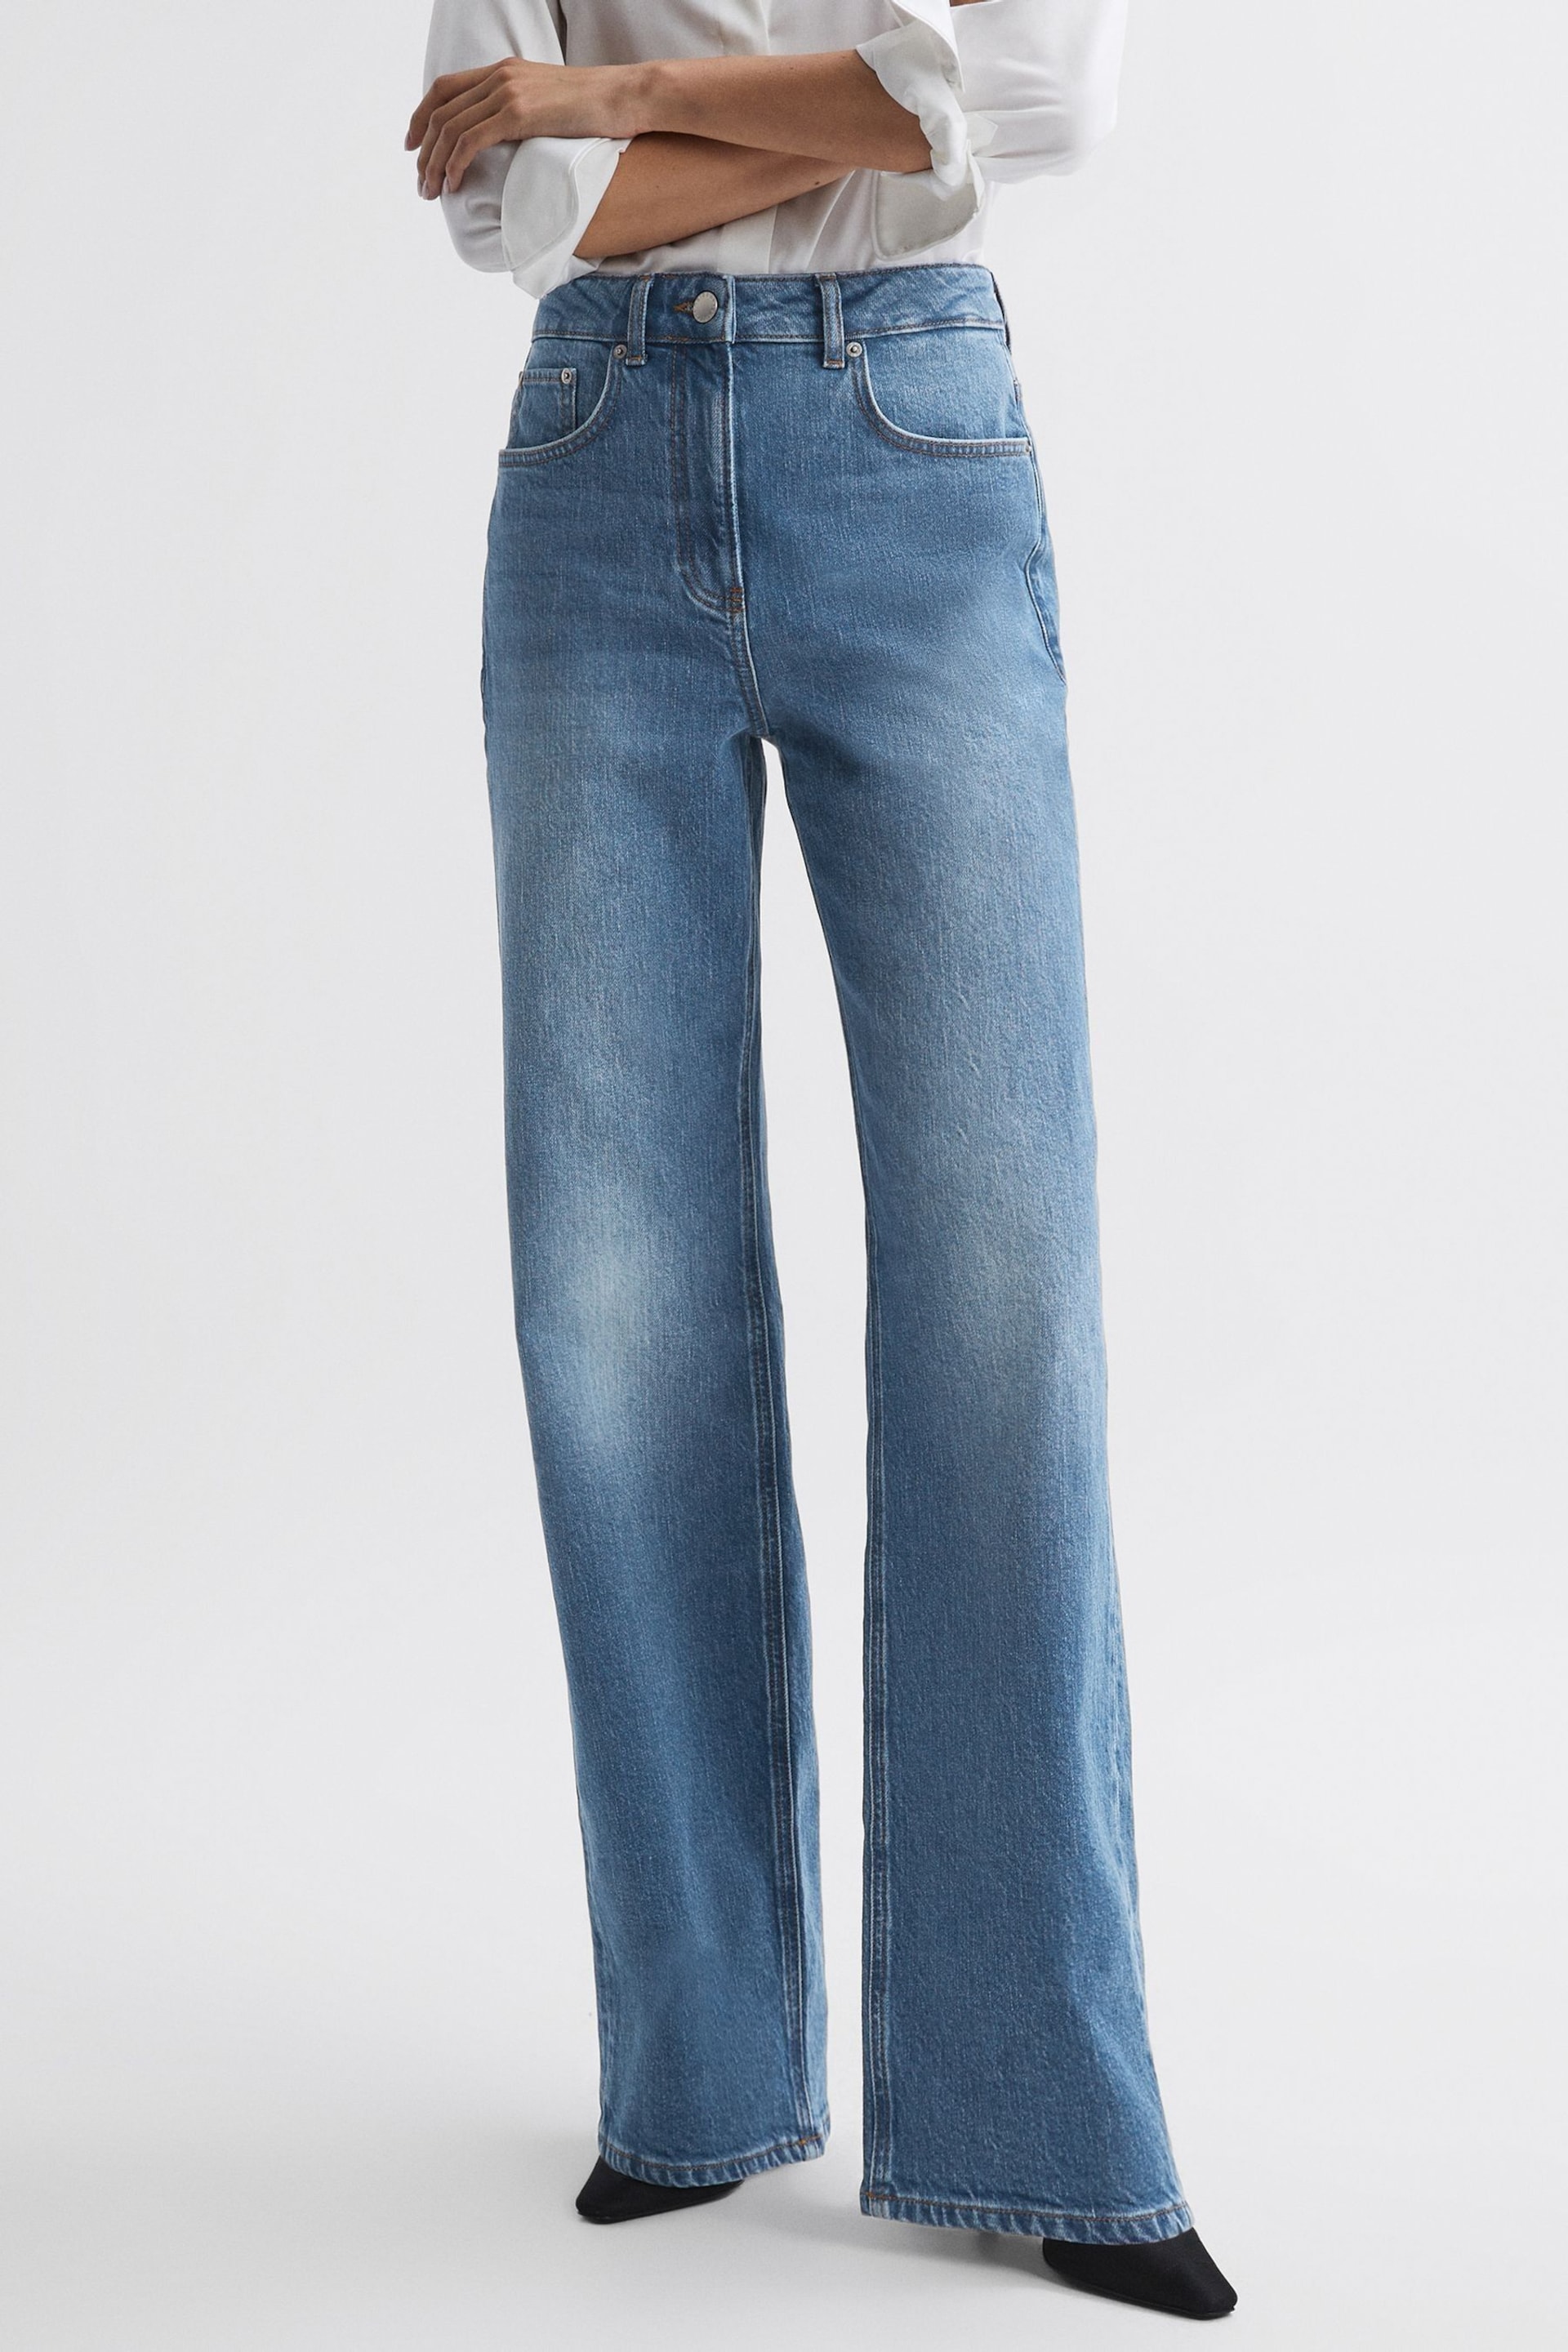 Reiss Mid Blue Marion Mid Rise Wide Leg Jeans - Image 3 of 4